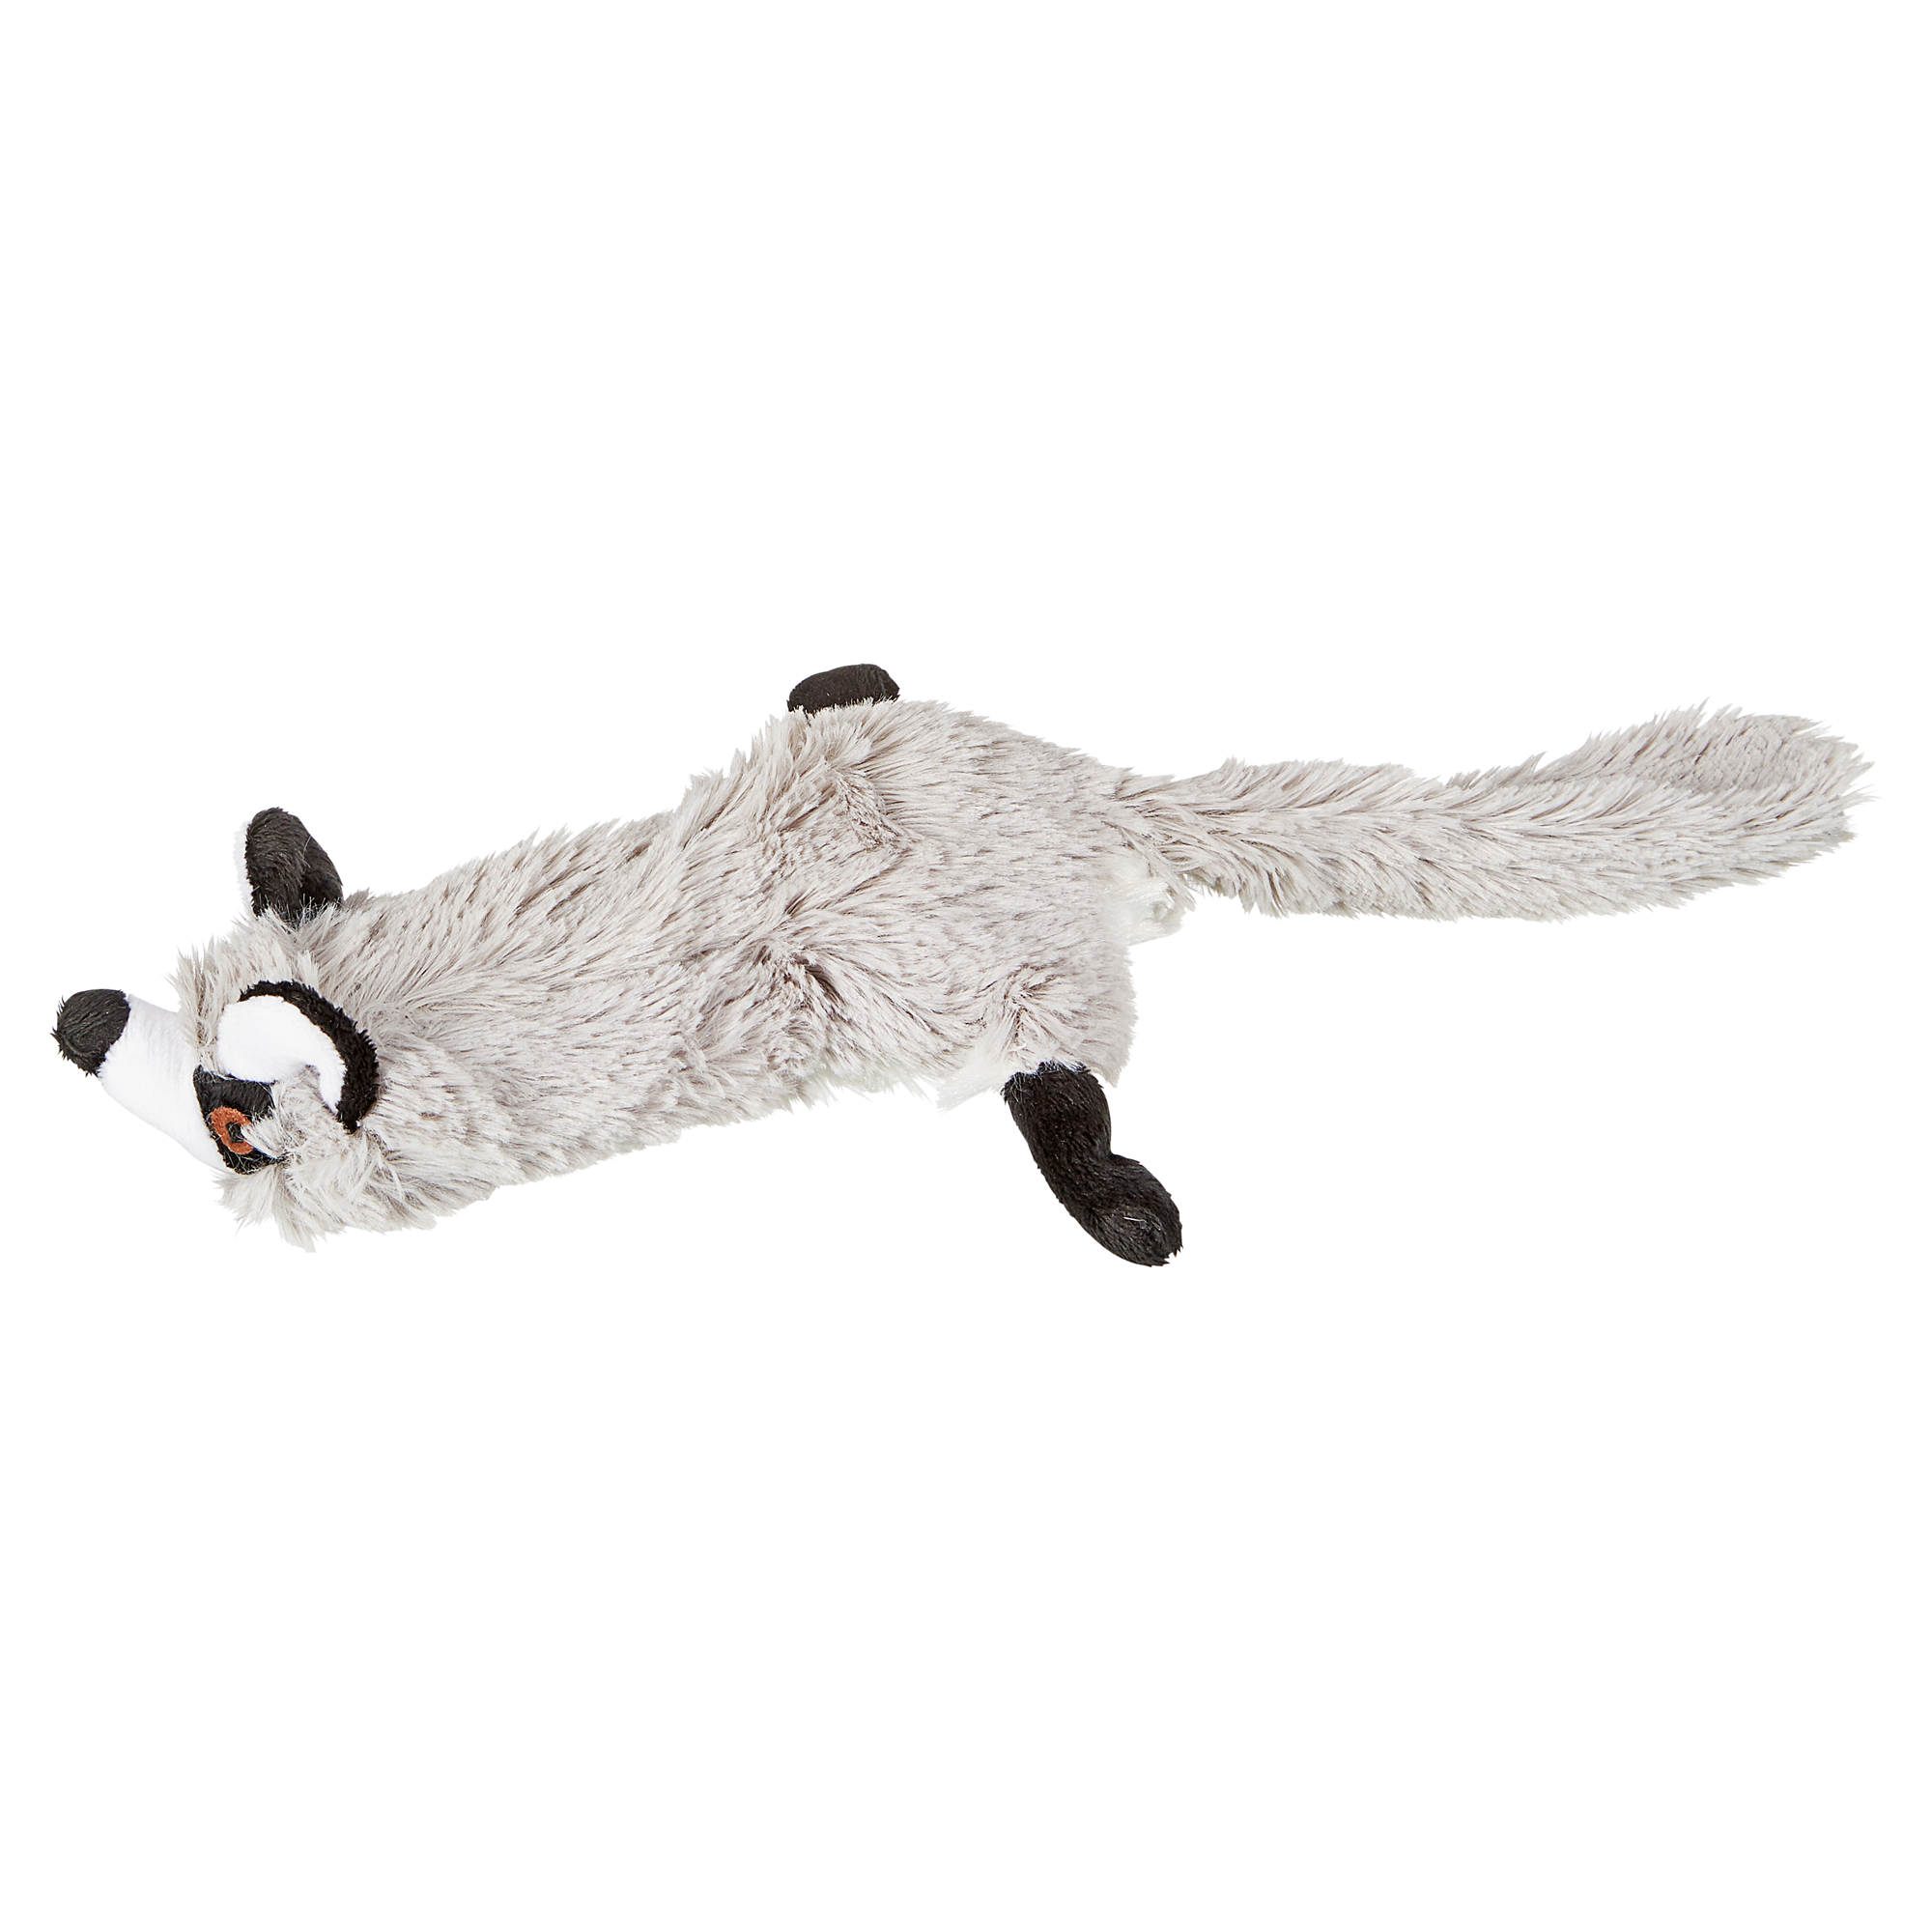 Hundespielzeug "Plush Toy" Tier Polyester + product picture